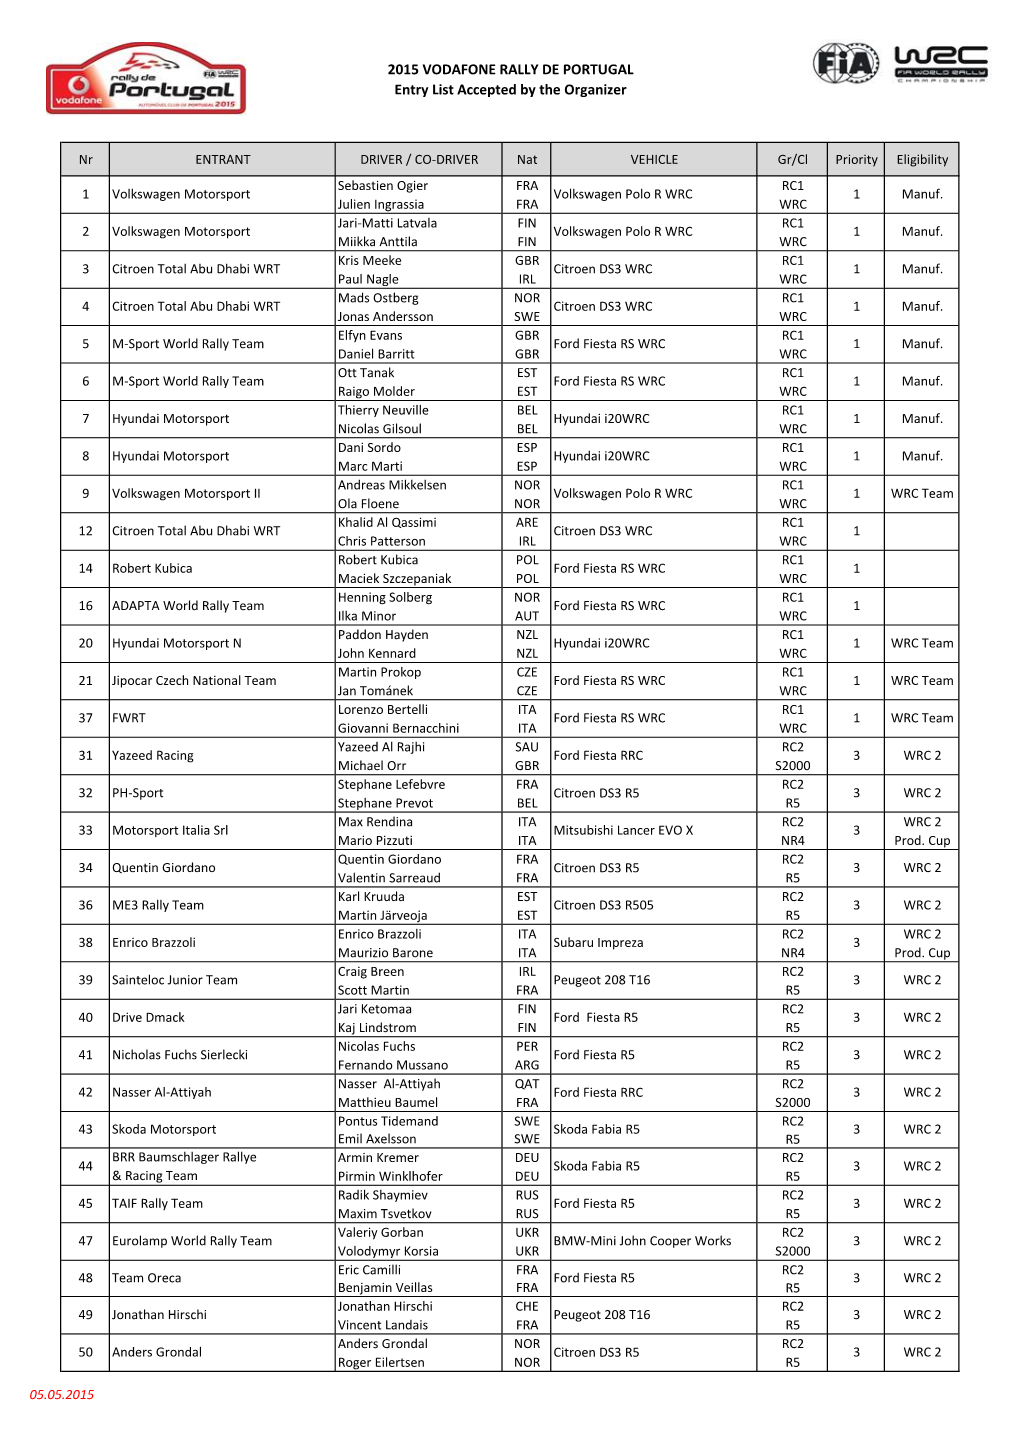 2015 VODAFONE RALLY DE PORTUGAL Entry List Accepted by the Organizer